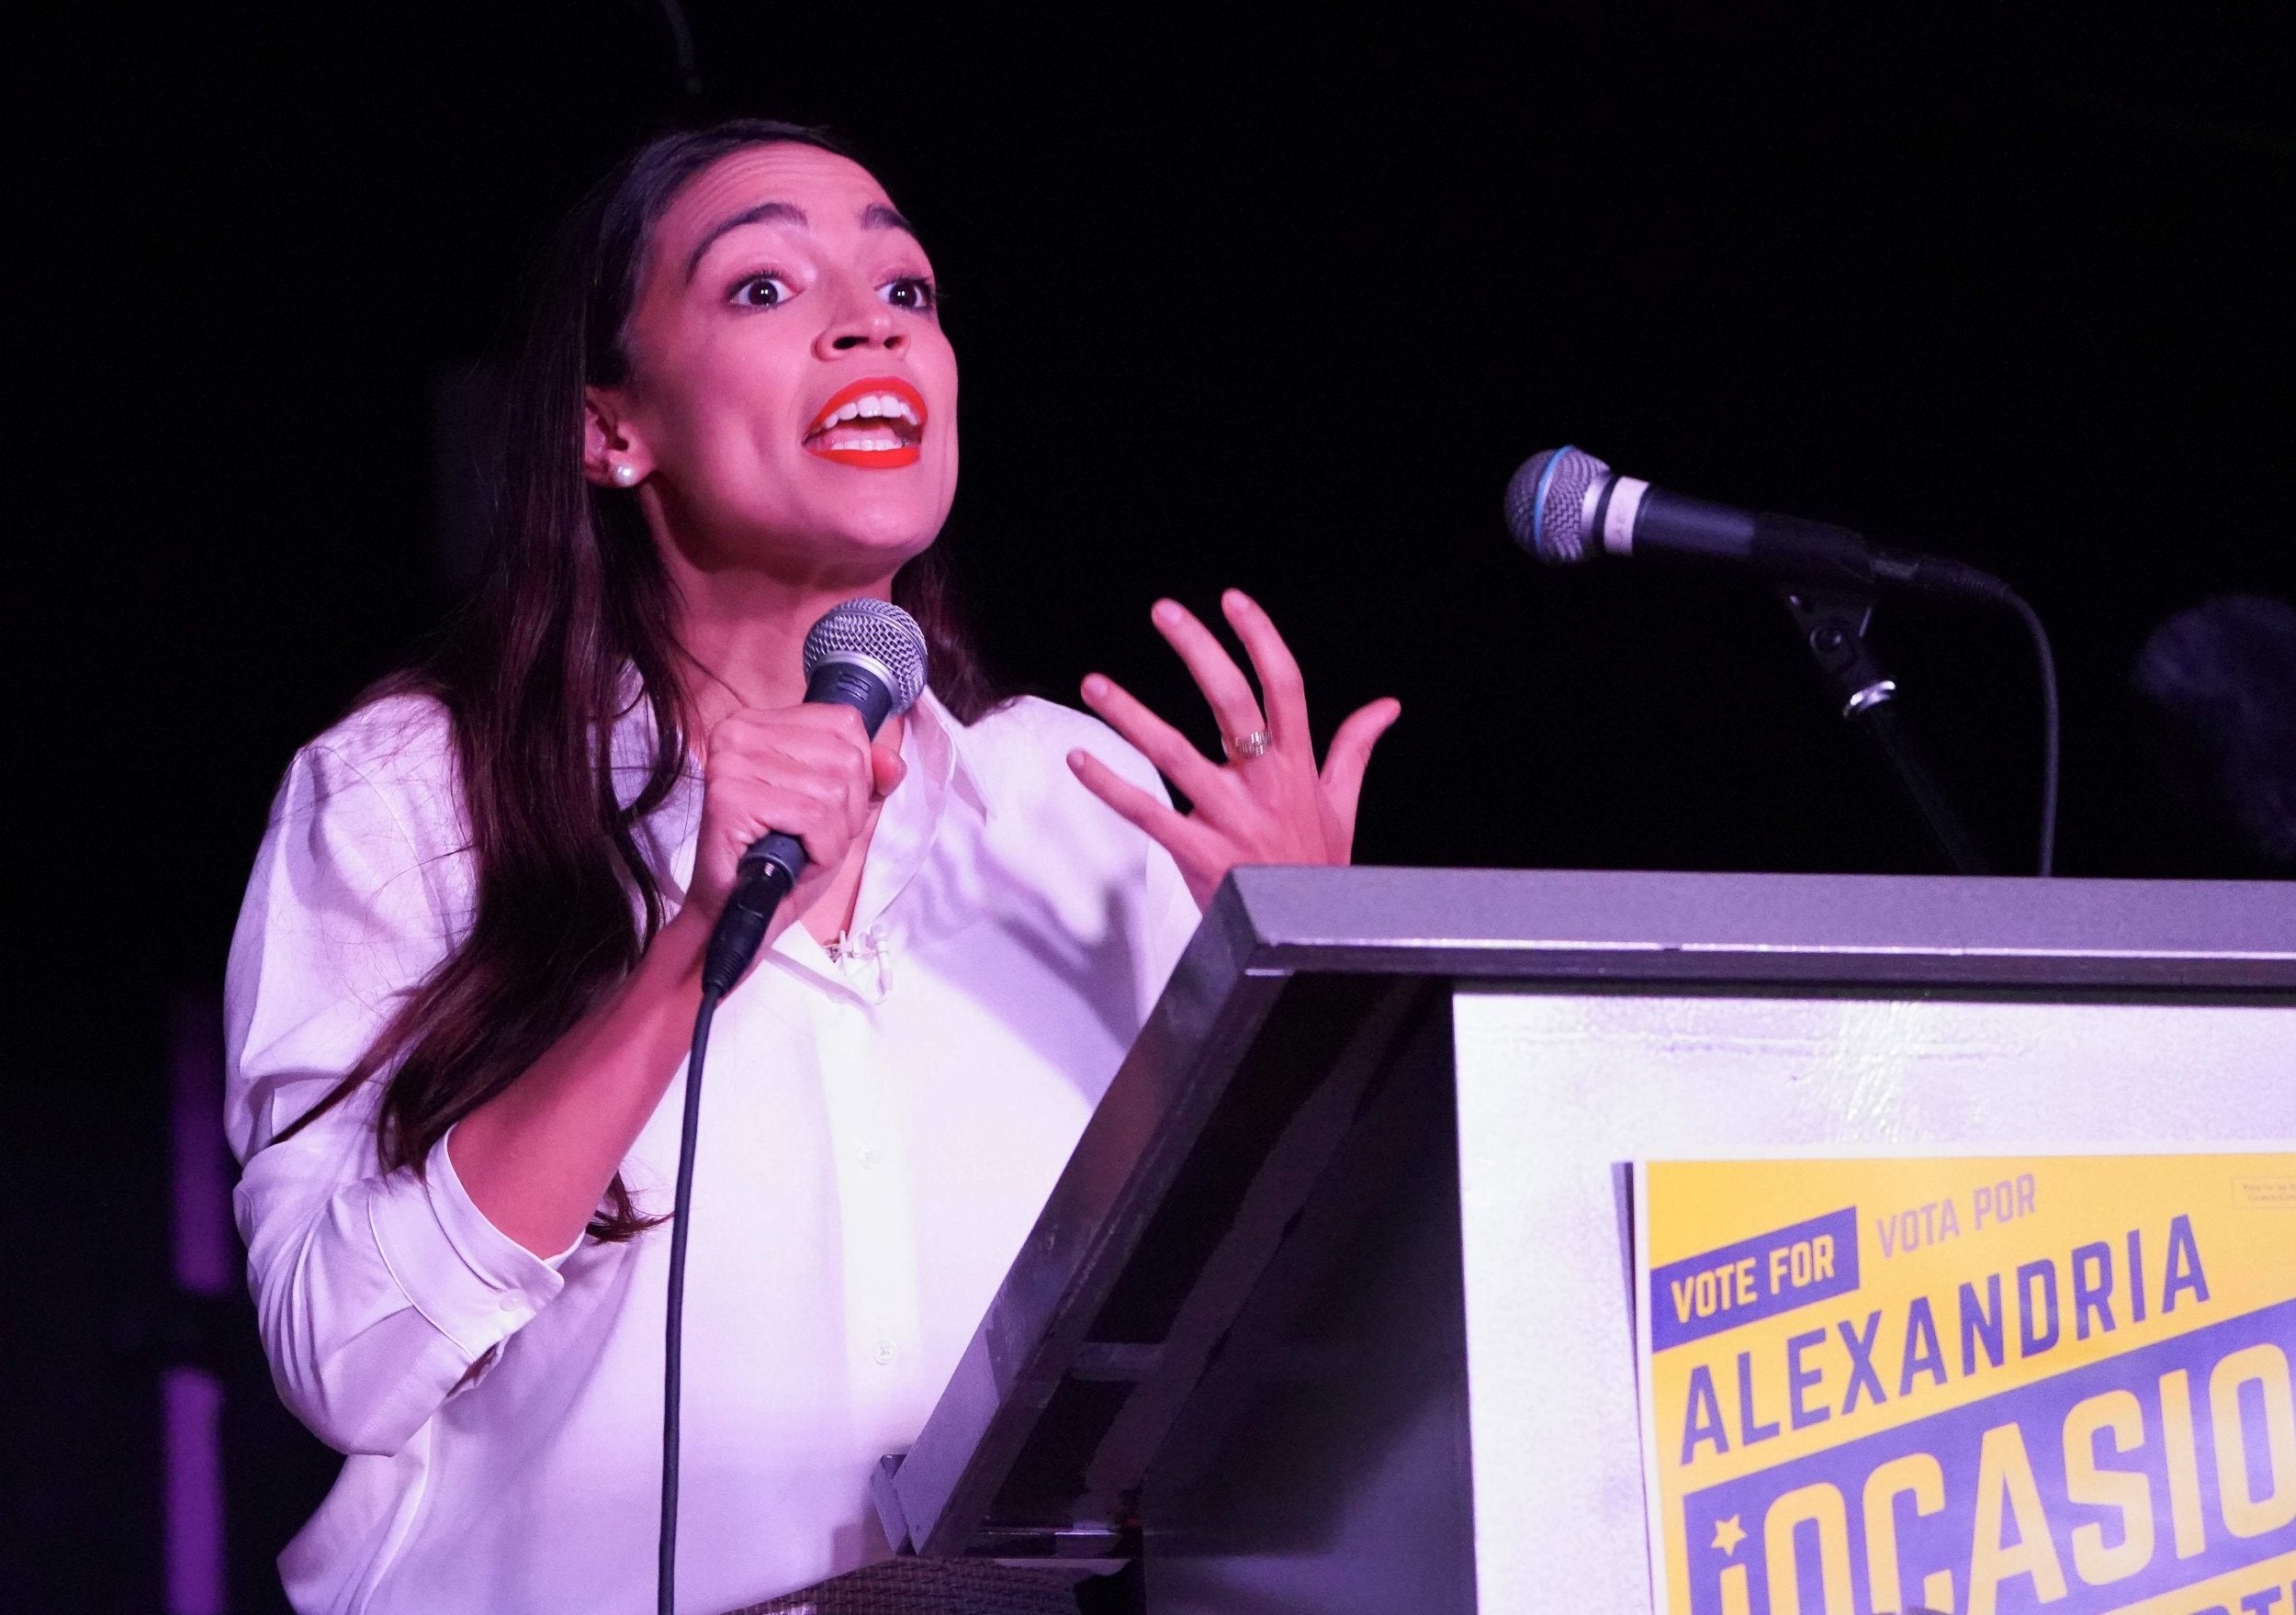 Alexandria Ocasio-Cortez today became the youngest woman elected to Congress